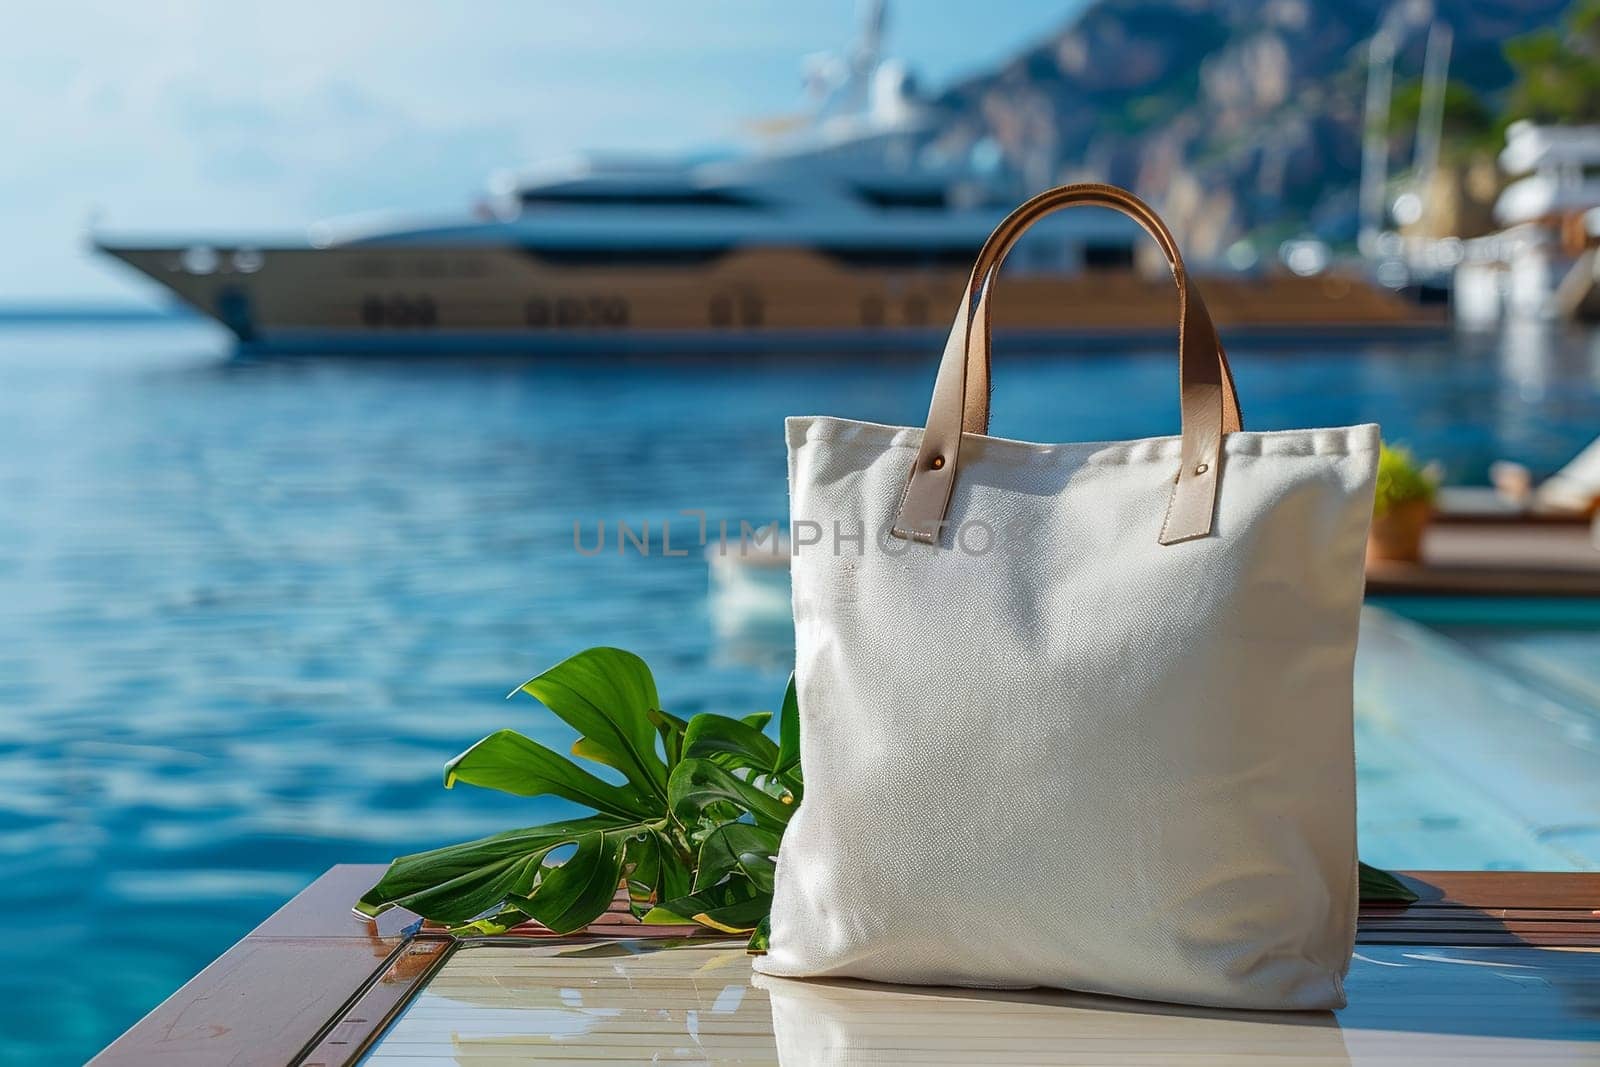 A white purse is sitting on a table next to a boat. The purse is made of leather and has a brown strap. The scene is set on a sunny day, with the boat in the background and the purse on the table